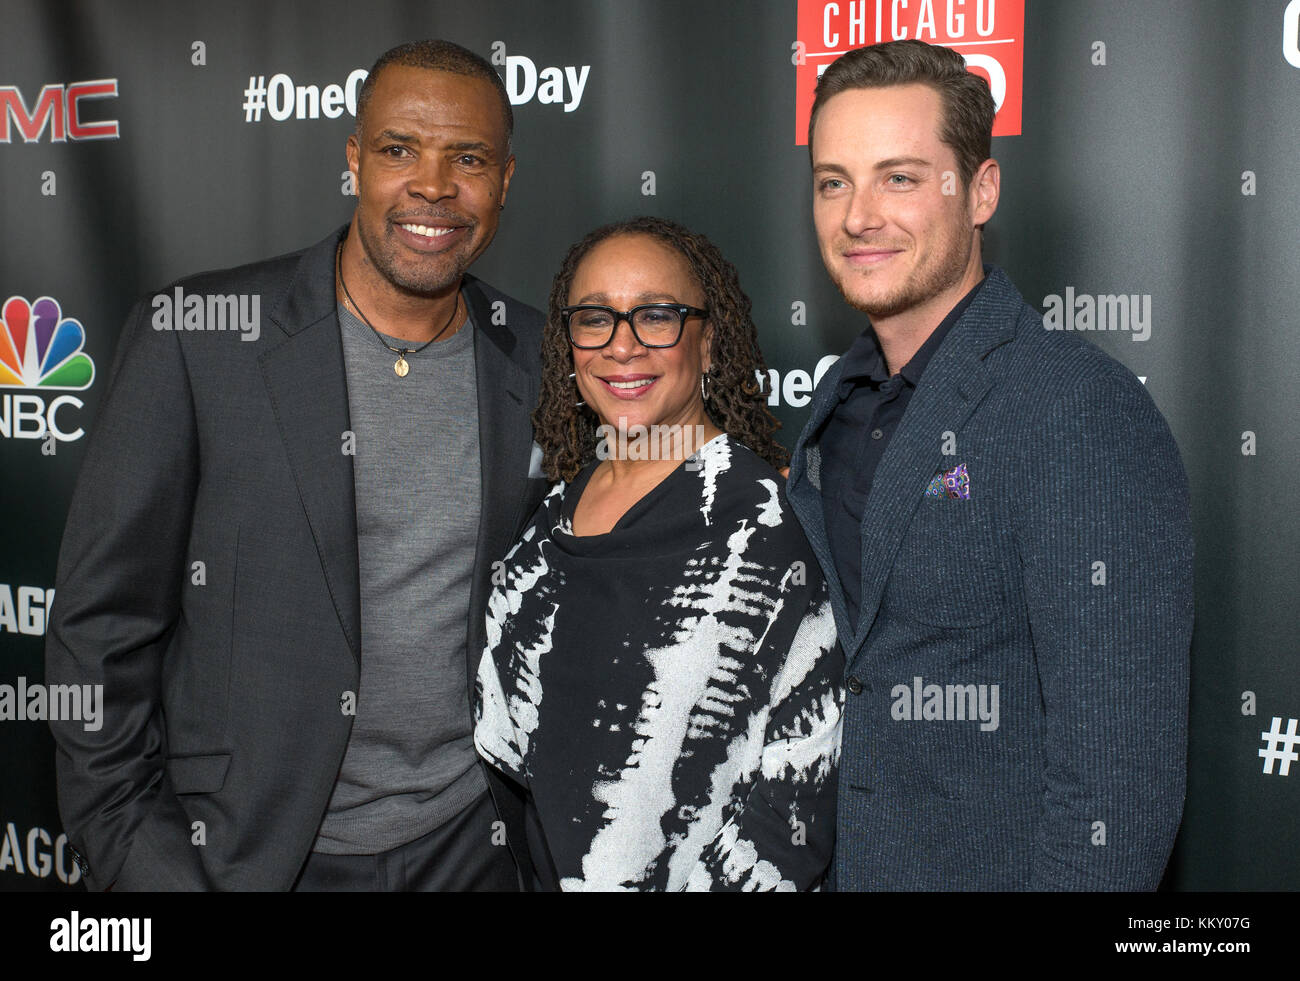 3rd annual NBC One Chicago Party featuring cast members from Chicago Fire, Chicago Med and Chicago P.D - Arrivals  Featuring: Eriq La Salle, S. Epatha Merkerson, Jesse Lee Solter Where: Chicago, Illinois, United States When: 31 Oct 2017 Credit: WENN Stock Photo